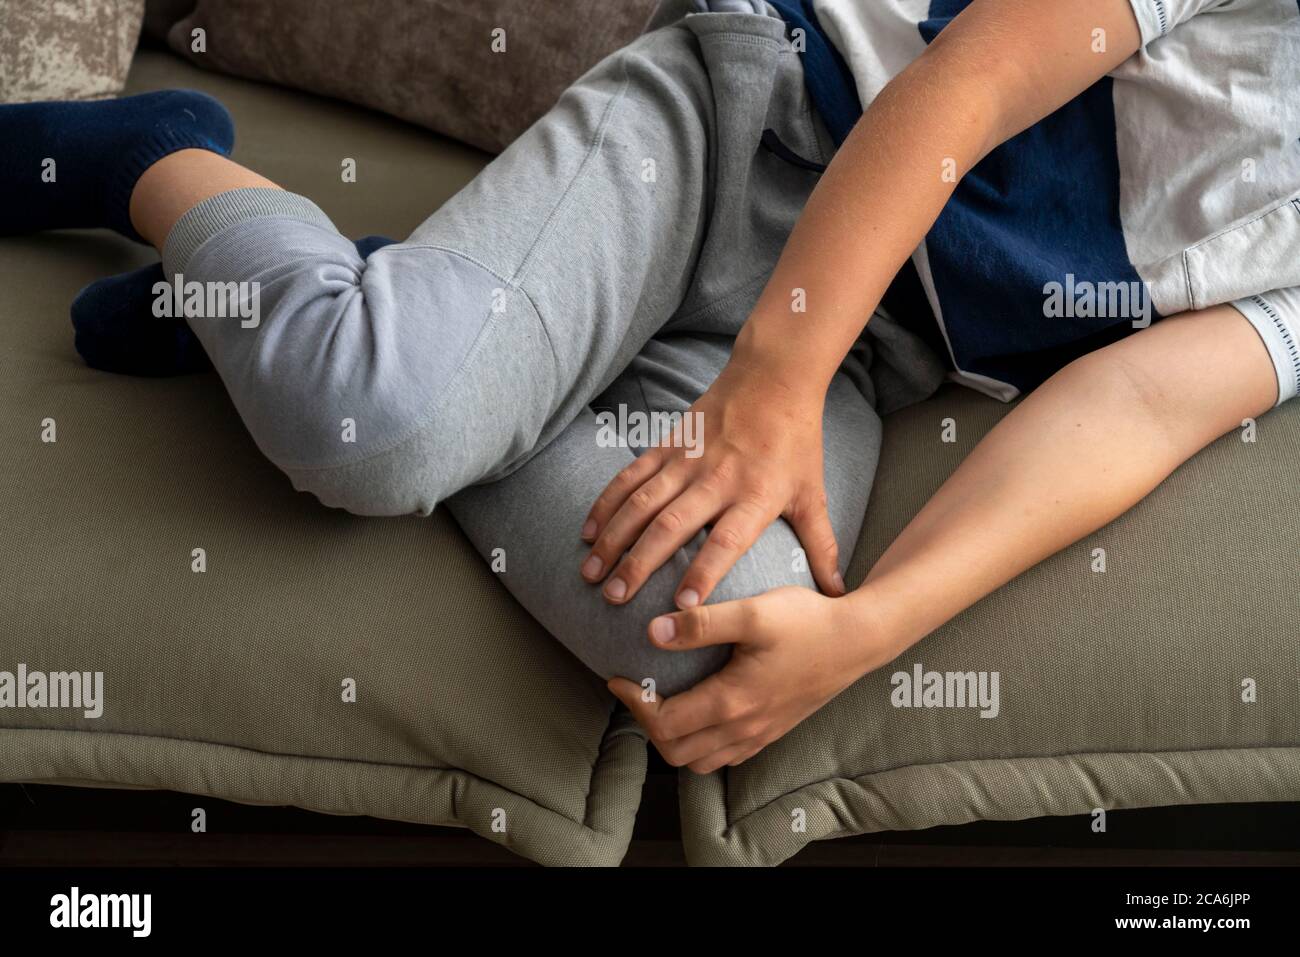 Growth pain in children, boy, 10 years old, has pain in the leg, symbolic image, Stock Photo